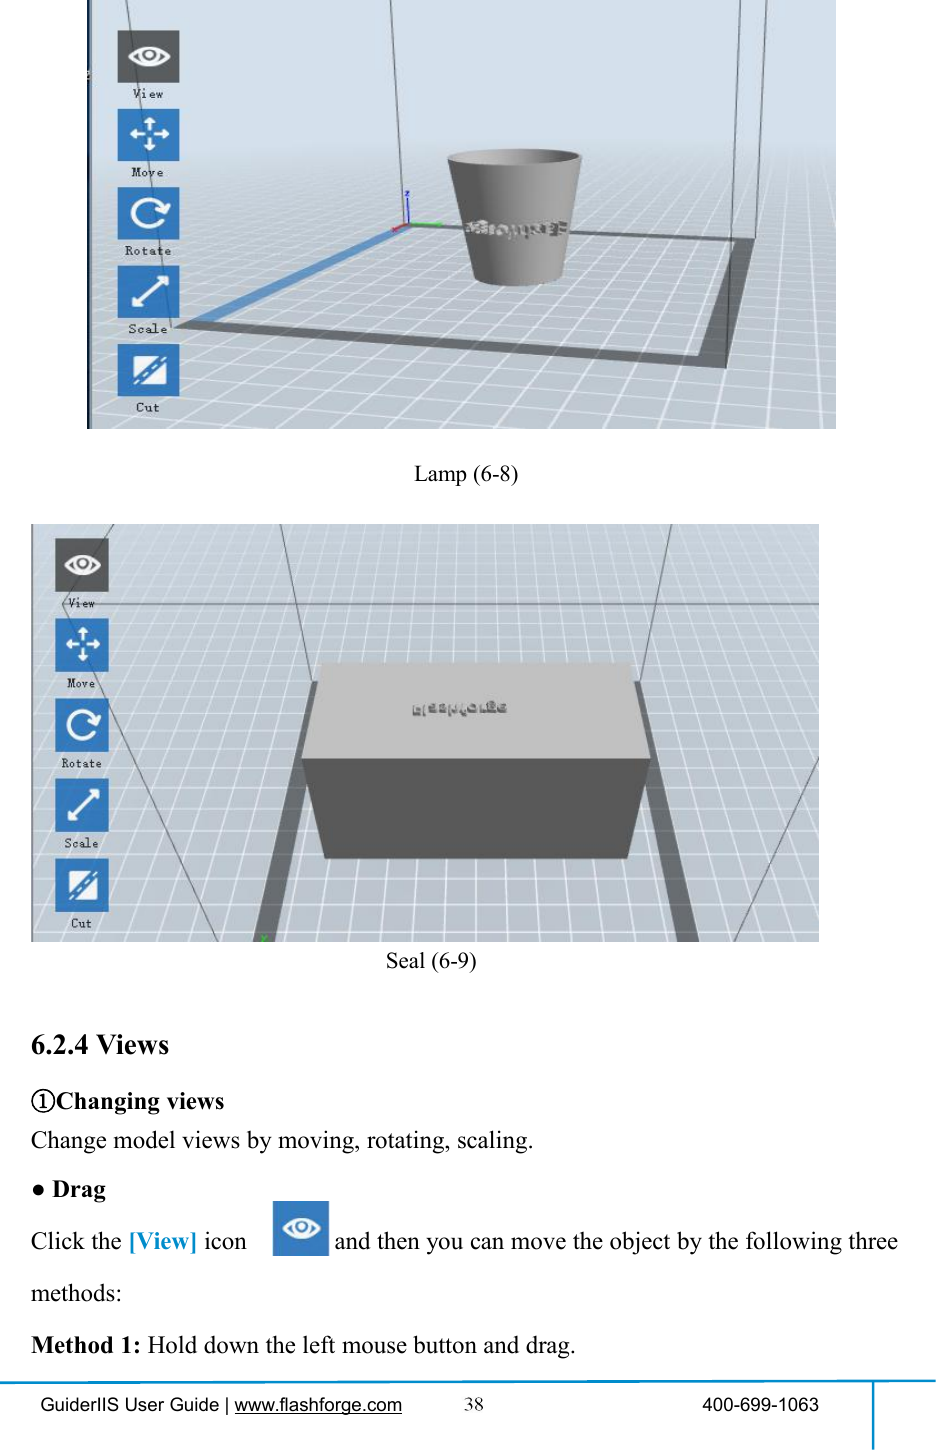 GuiderIIS User Guide | www.flashforge.com 400-699-1063Lamp (6-8)Seal (6-9)6.2.4 Views①Changing viewsChange model views by moving, rotating, scaling.●DragClick the [View] icon and then you can move the object by the following threemethods:Method 1: Hold down the left mouse button and drag.